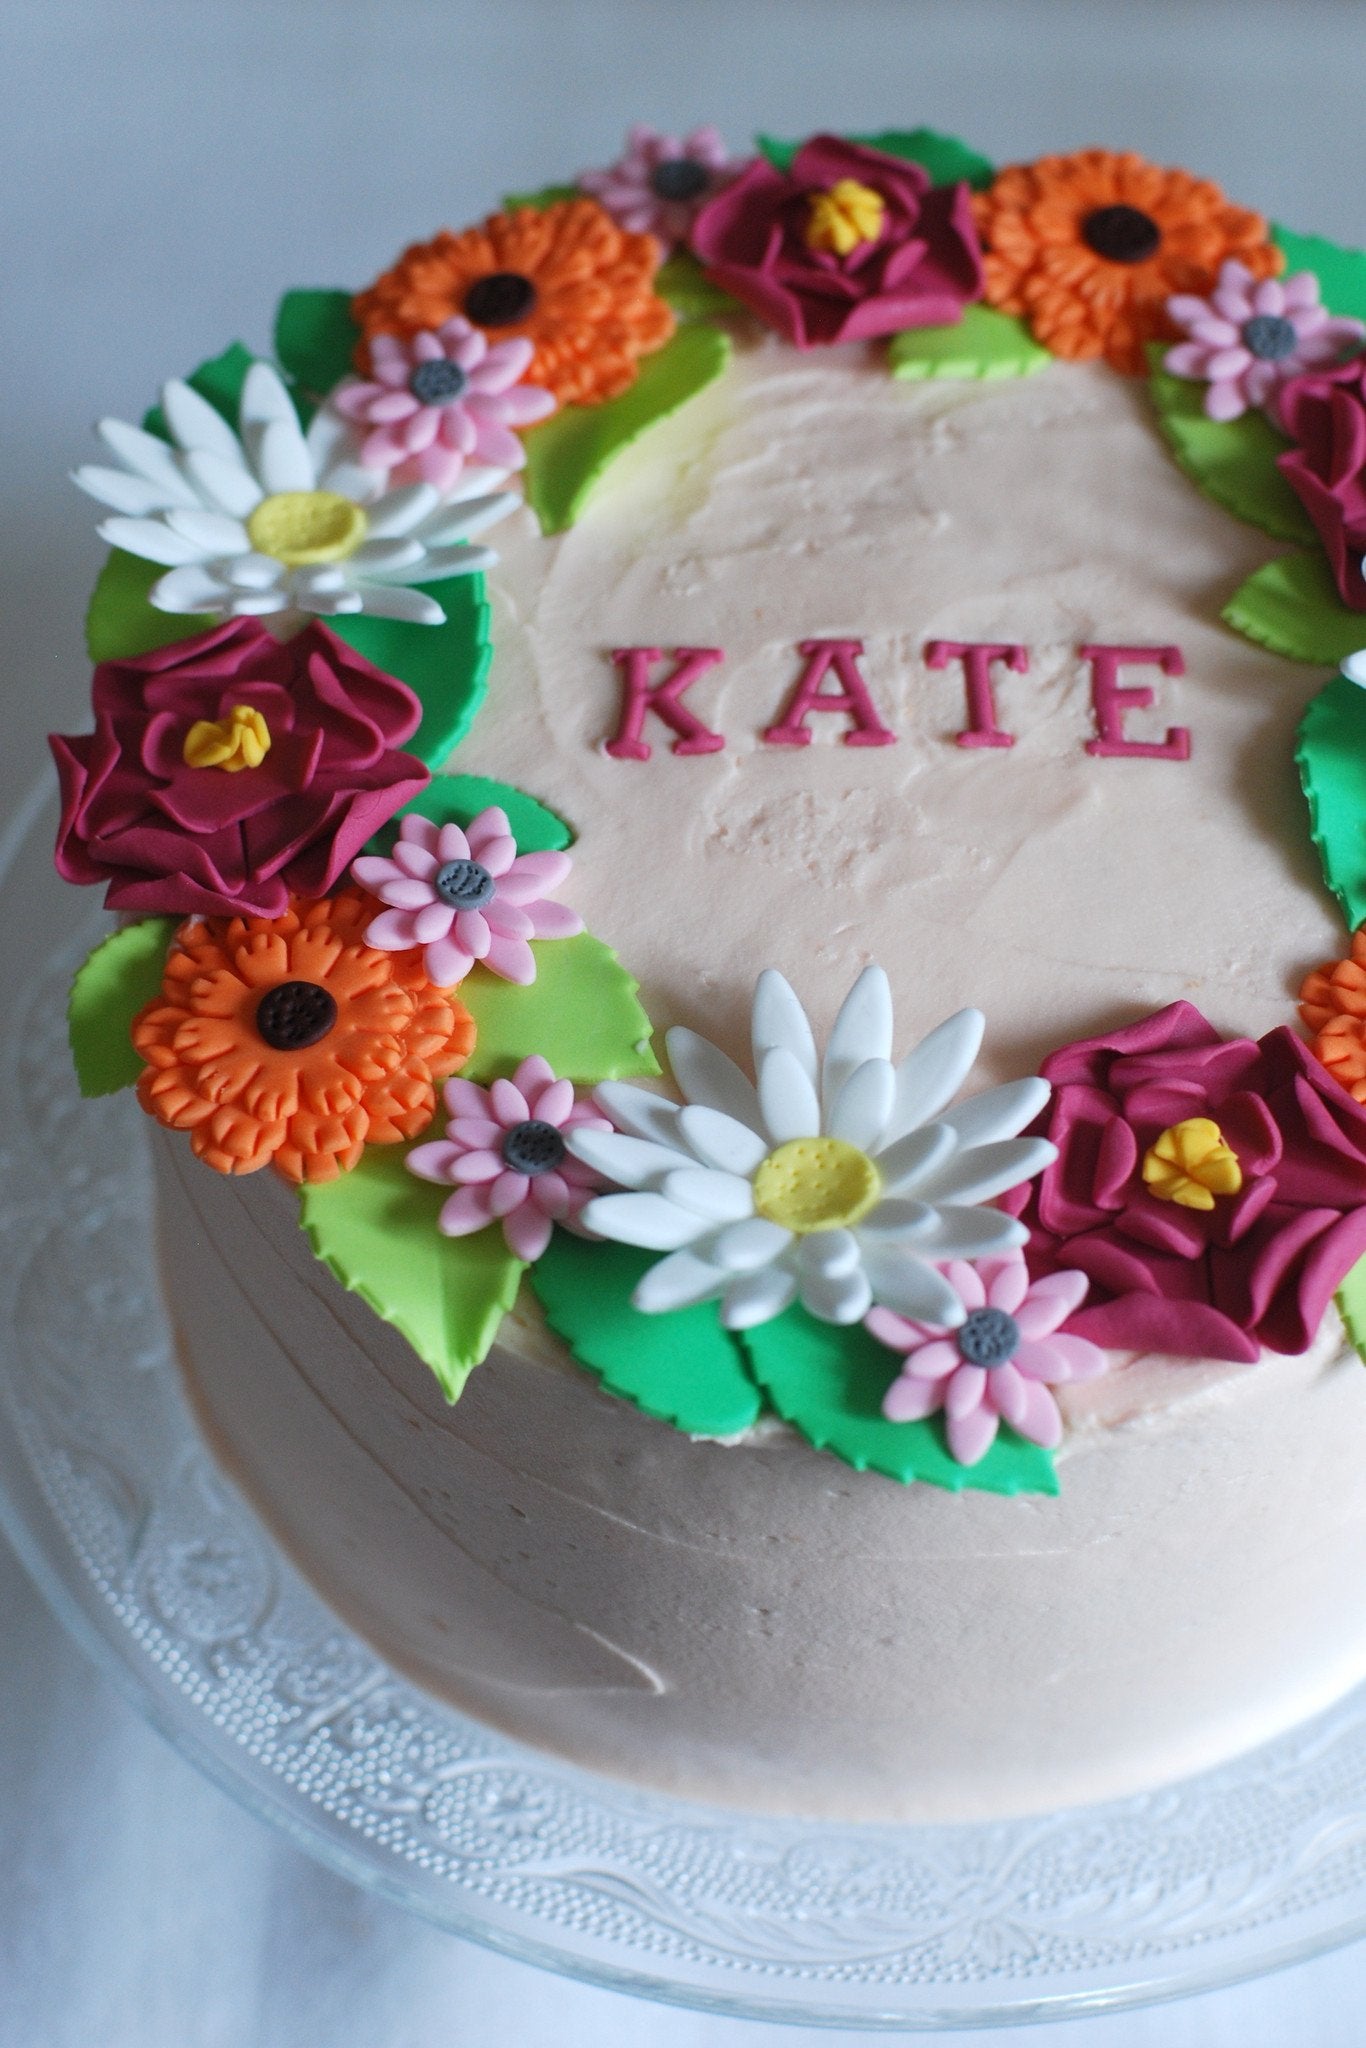 Flower Themed Cakes | Claygate, Surrey | Afternoon Crumbs